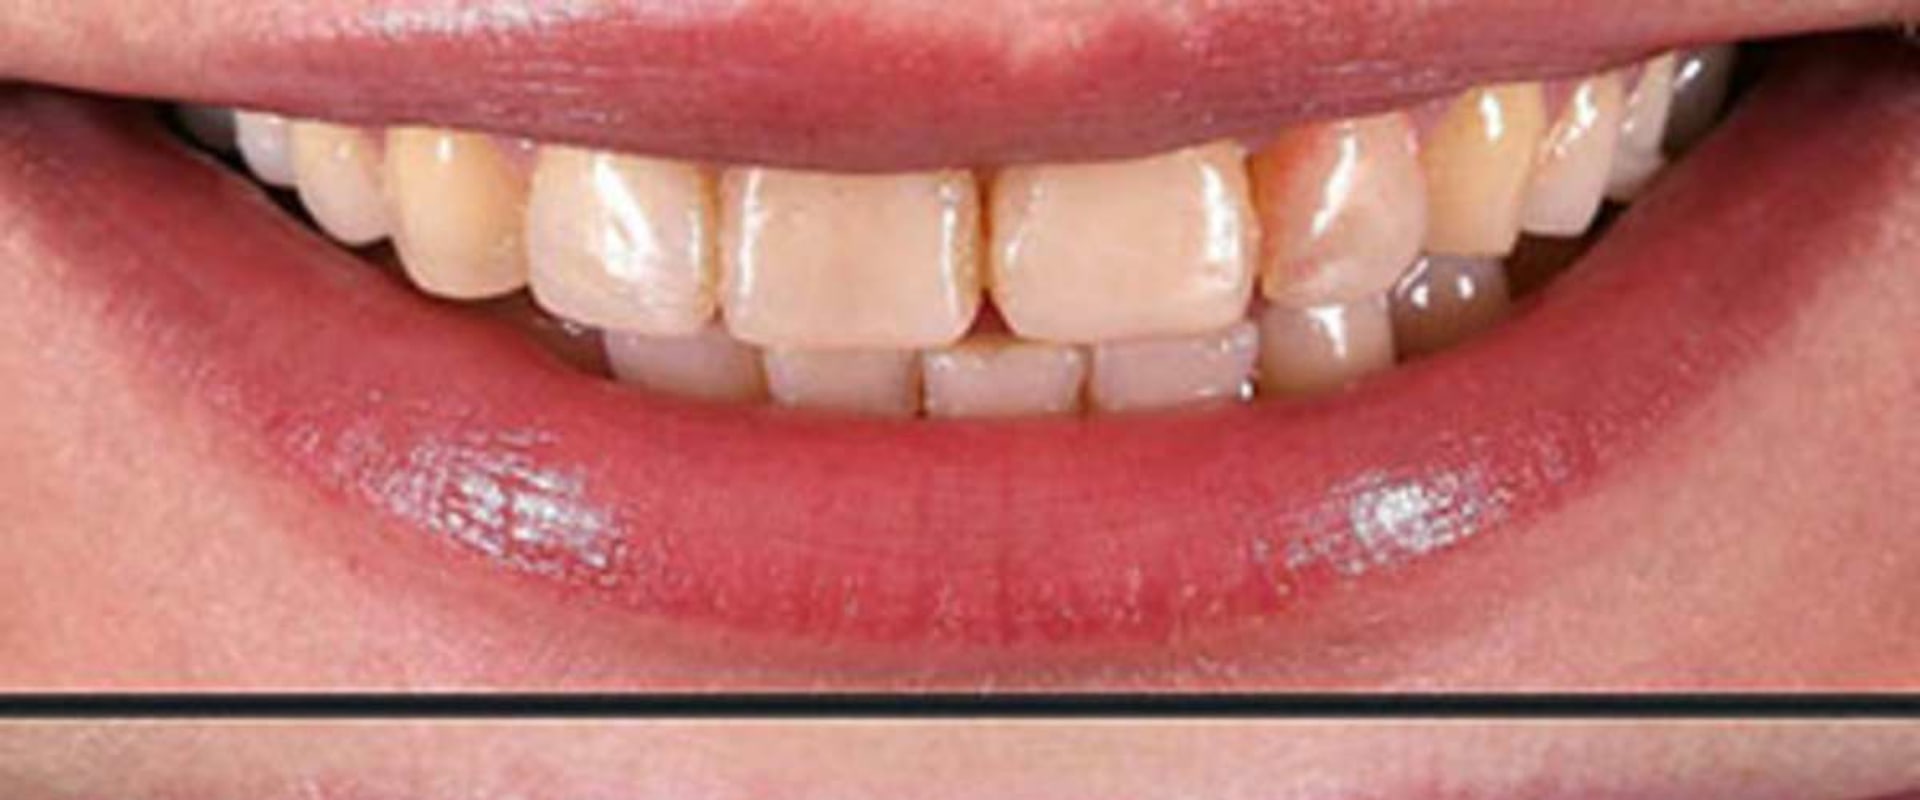 The Art of Cosmetic Dentistry in India: Cost, Procedures and Destinations